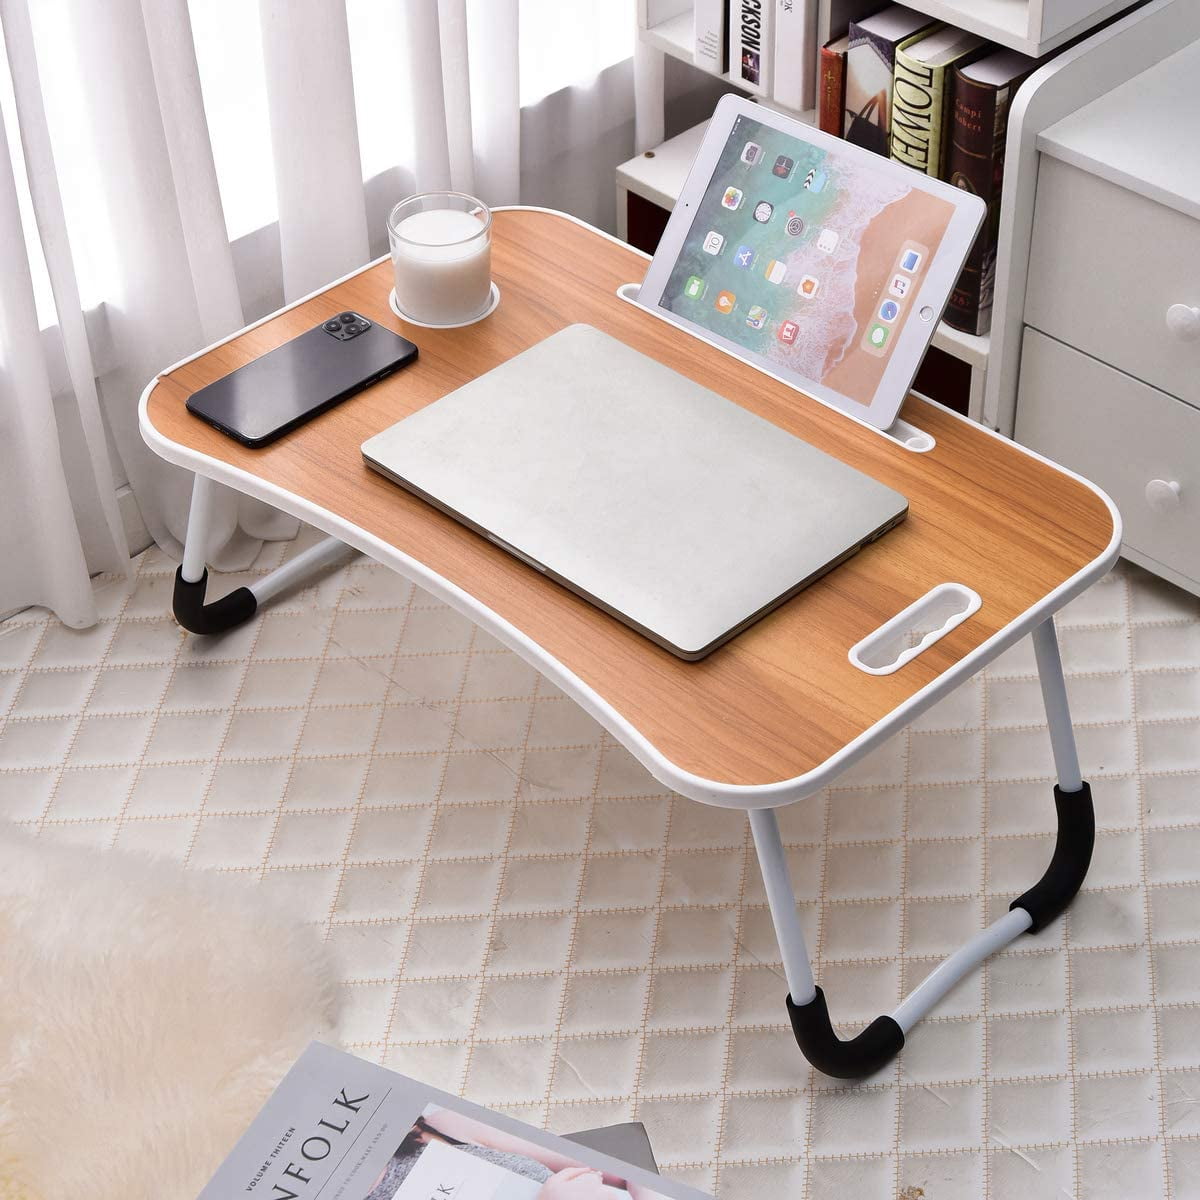 Foldable Portable Laptop Stand Bed Lazy Laptop Table With Card Slot Small Desk 